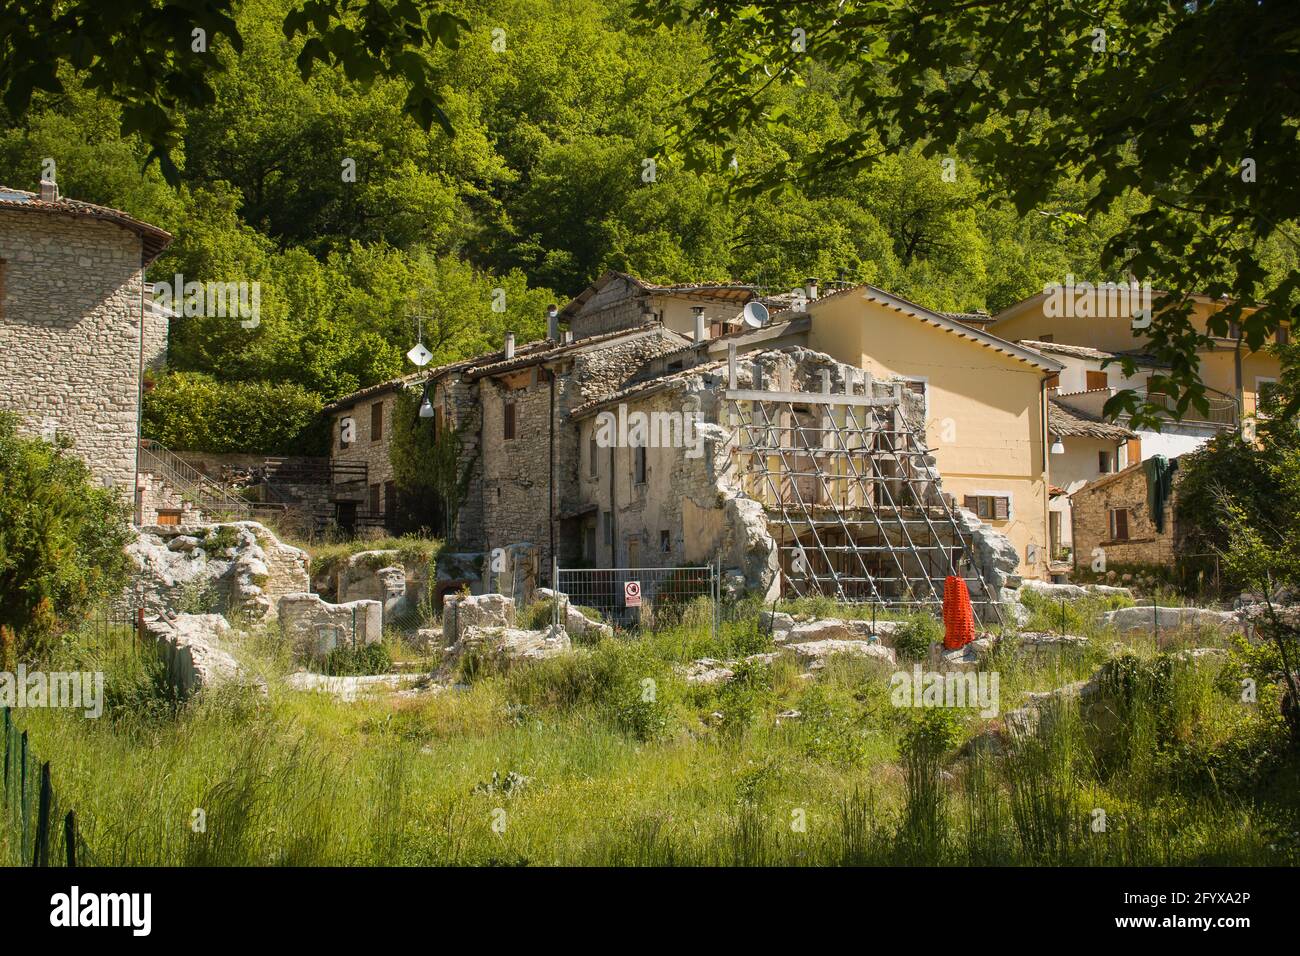 View of Ussita mountain village destroyed by earthquake of 2016 in the Marche region, Italy Stock Photo